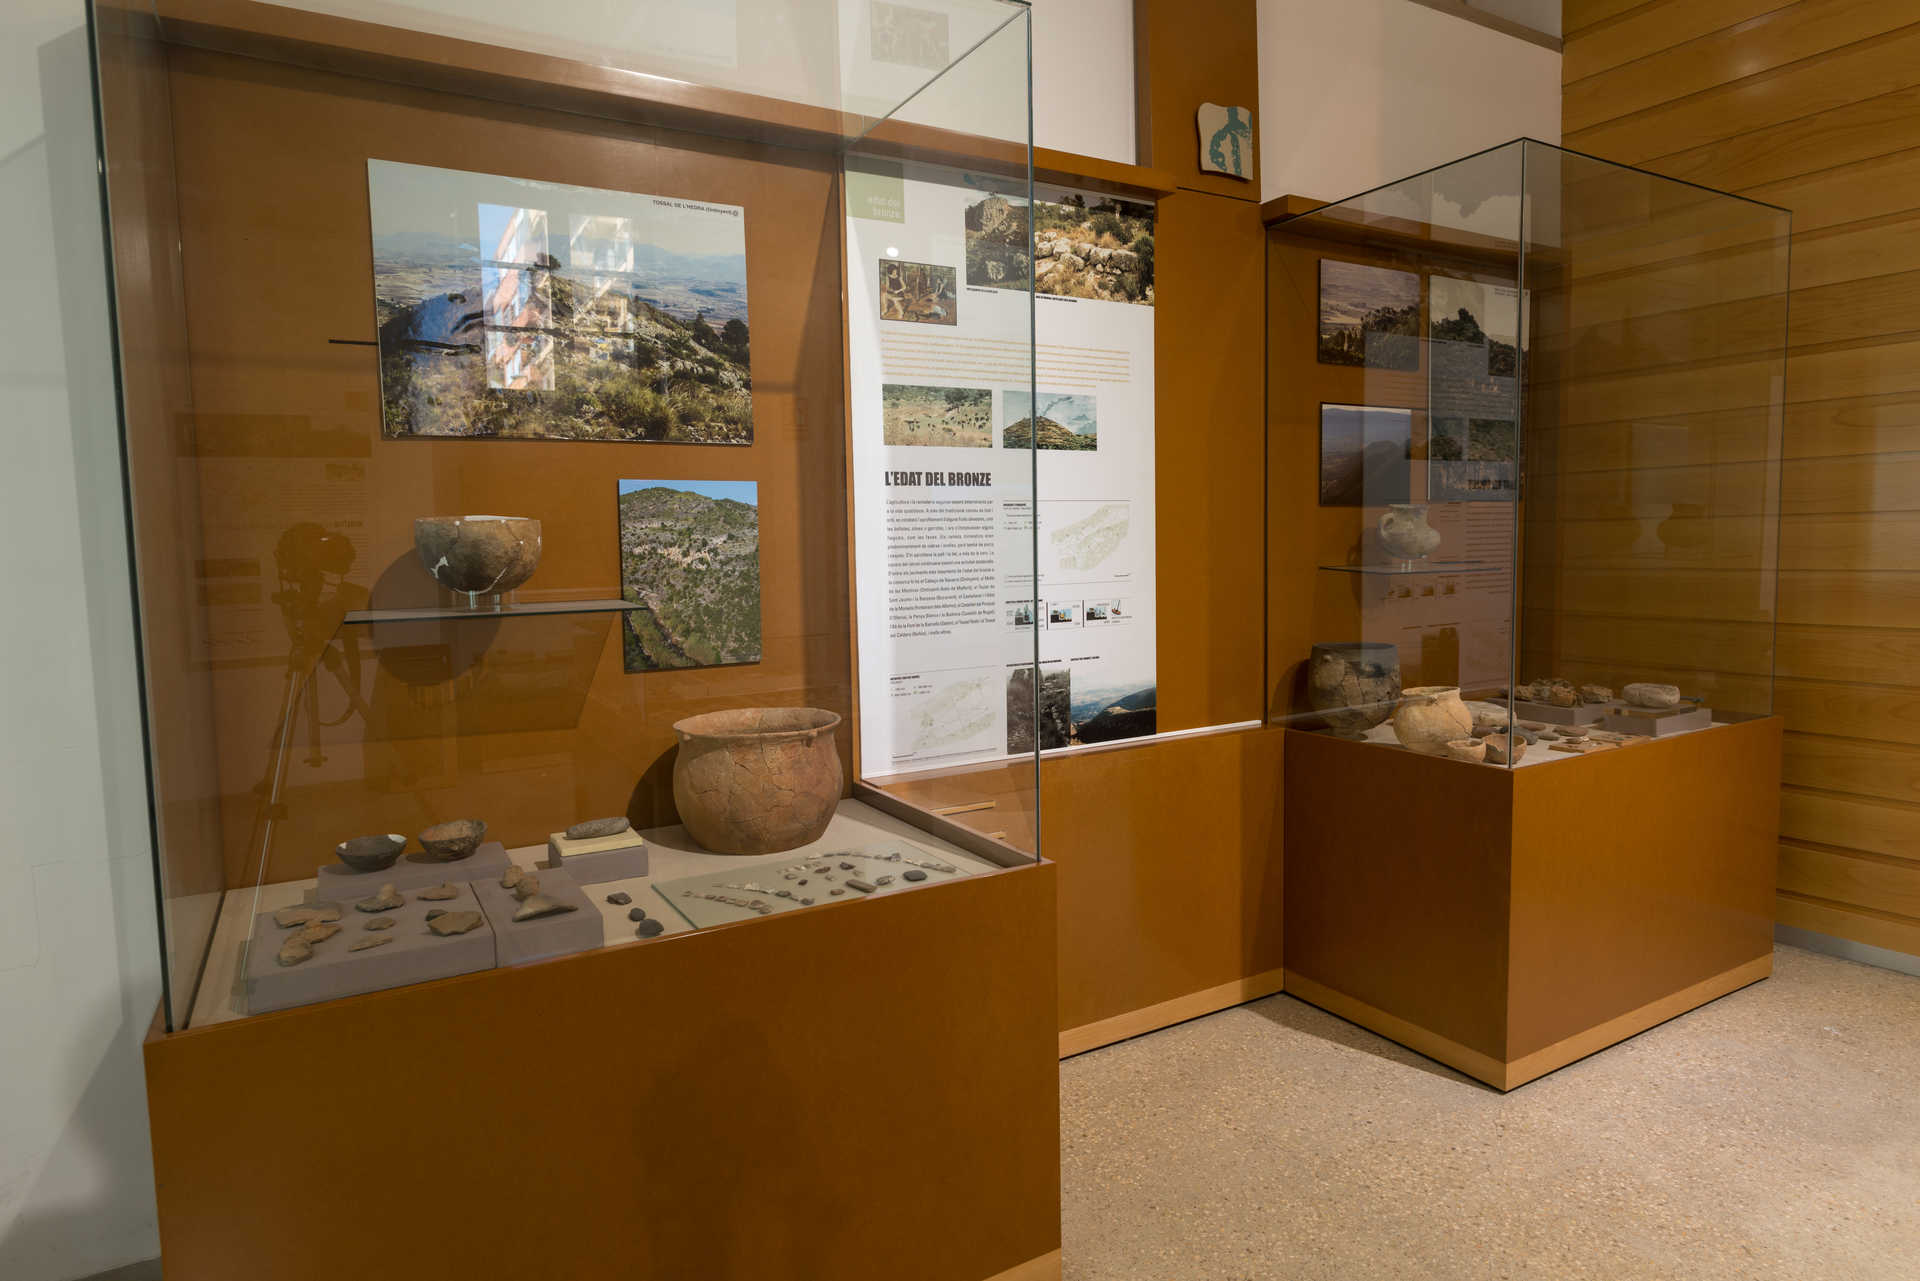 The Ontinyent And La Vall D’albaida- (MAOVA) Museum Of Archaeology